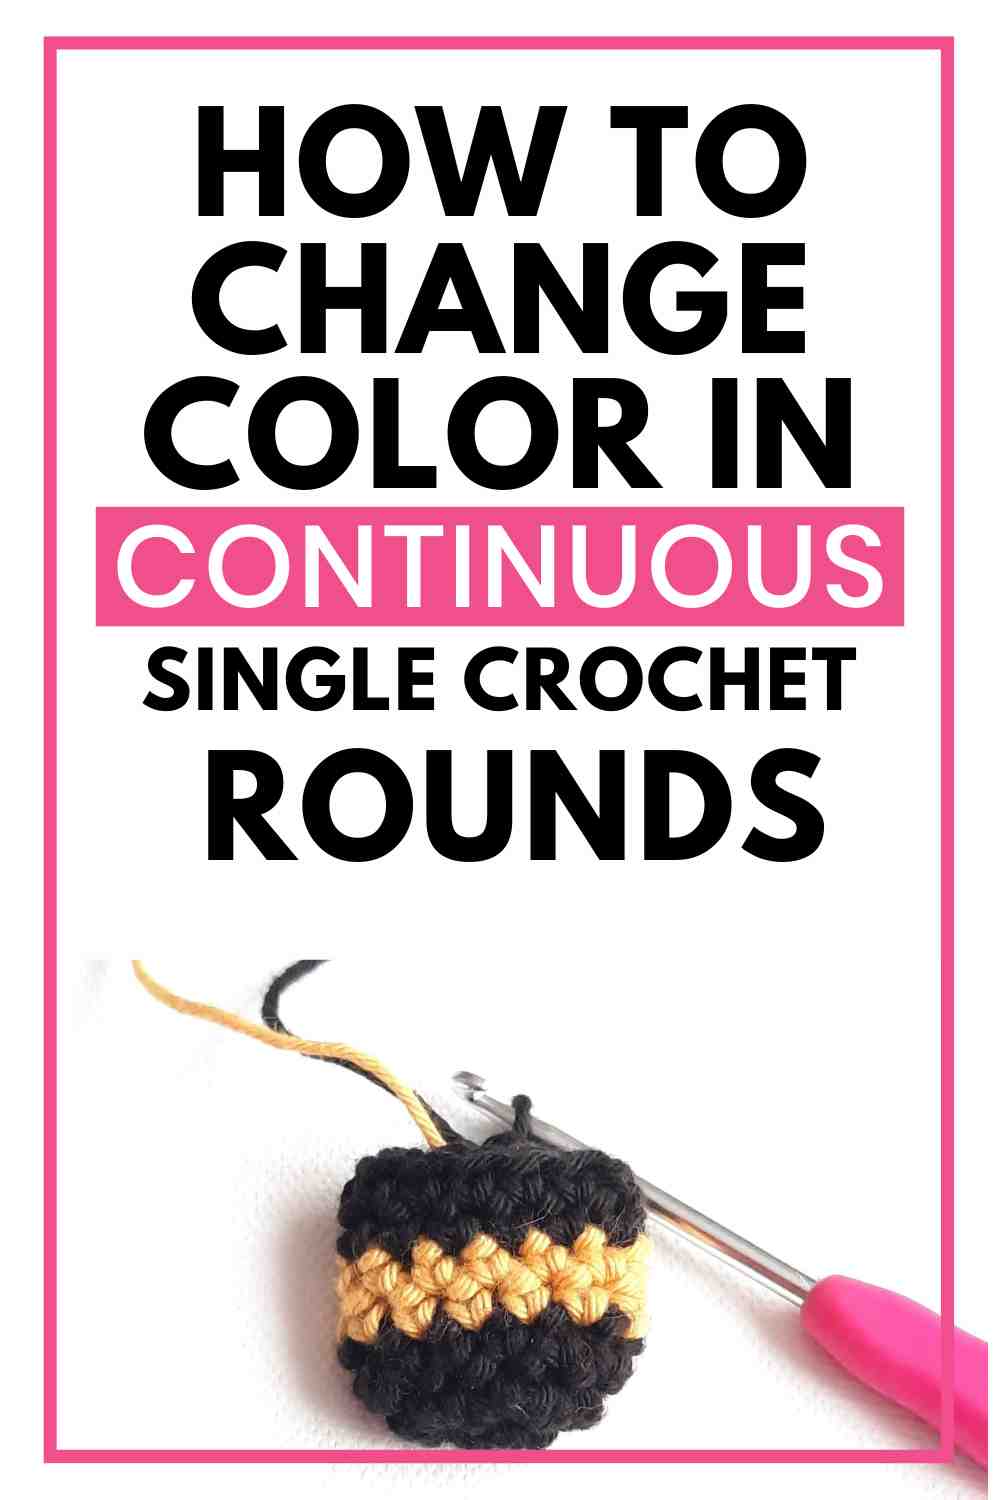 How To change color in continuous single crochet rounds